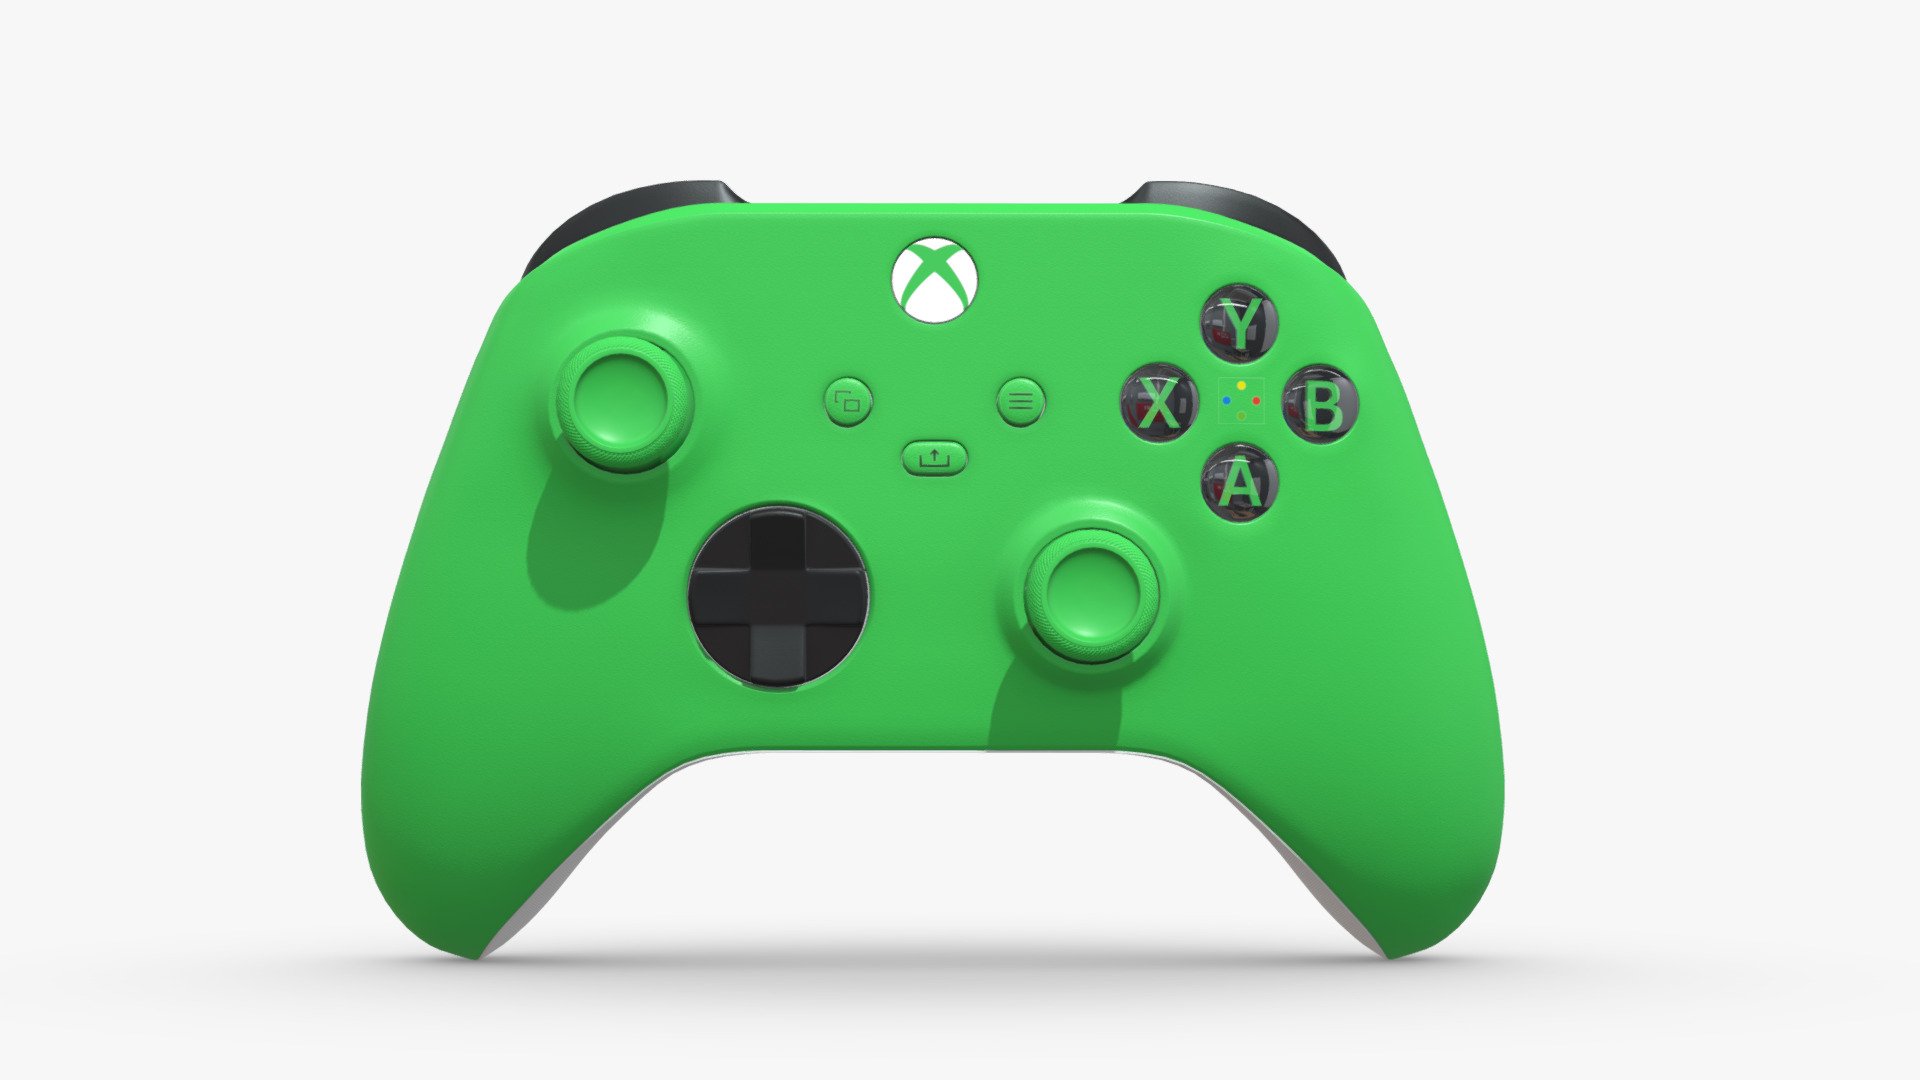 Xbox Wireless Controller Velocity Green

The file includes a 3D model and 4k PBR textures in png format.

Blender, Obj and Fbx files are included.

The model was created in 3ds mas 2023 with the render engine V-Ray 5.0

You can request a different format.

Textures

PBR textures 4096x4096 pixels

each material contains




BasicColor.

AO.

Roughness.

Normal.

Metalness.

Opacity.

Emissive.

Note: This model is not for 3d printing.

Have a nice day! - Xbox Series X Controller Velocity Green - Buy Royalty Free 3D model by hado (@hado3d) 3d model